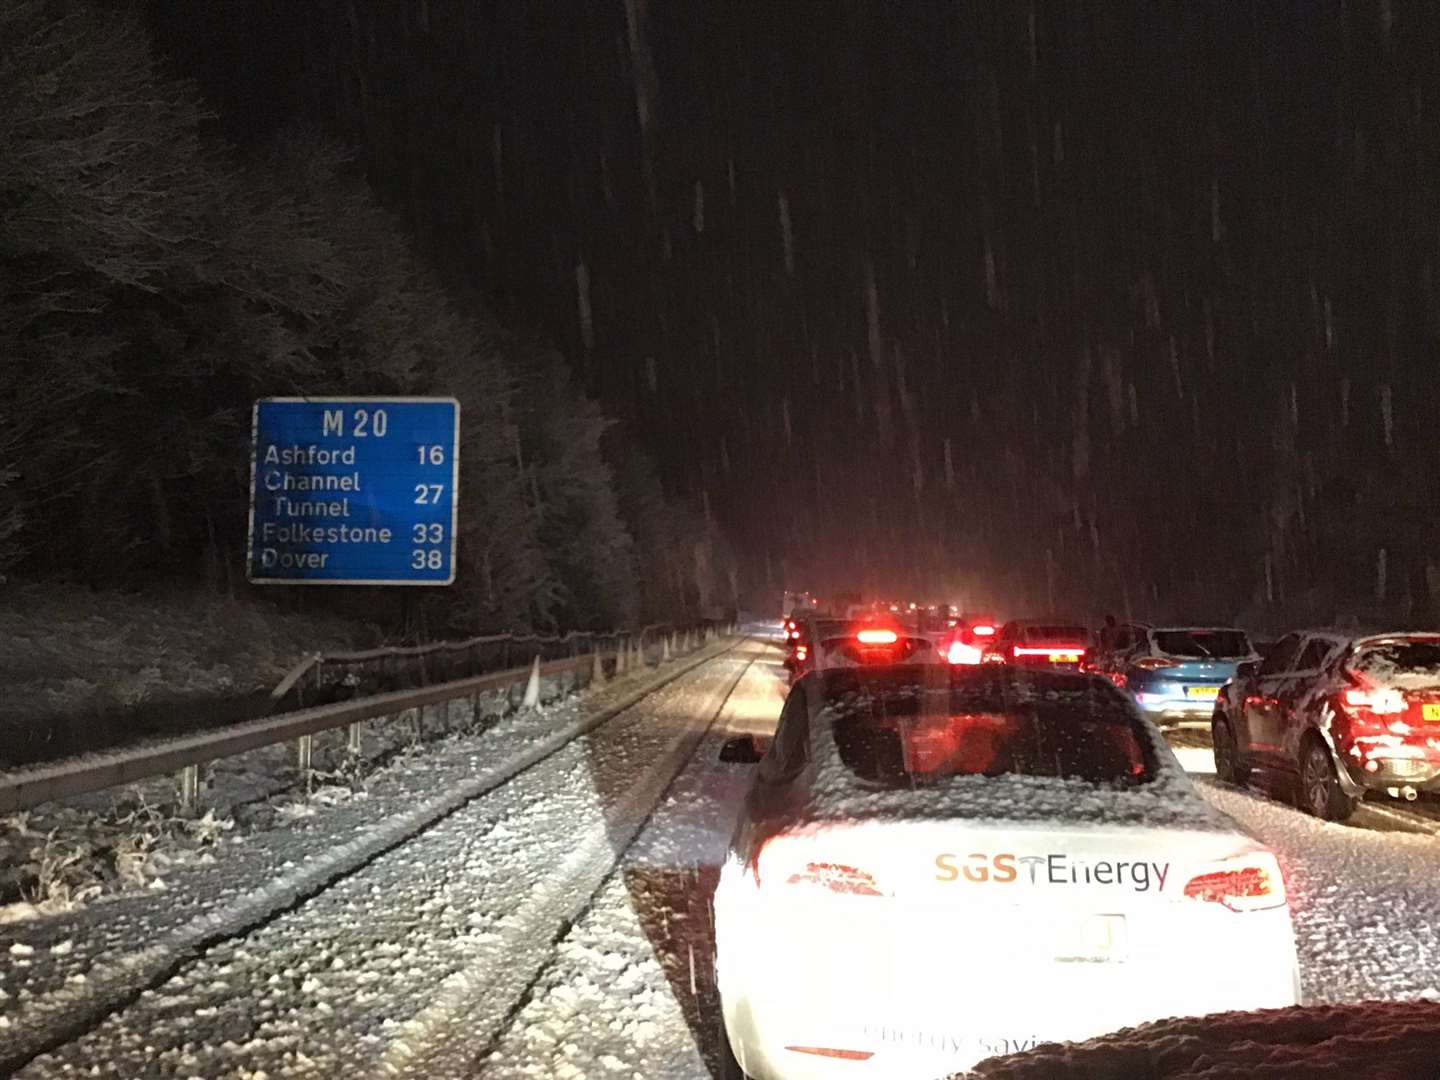 Traffic on the M20 is at standstill because of the snow. Picture: CatflapCarnage